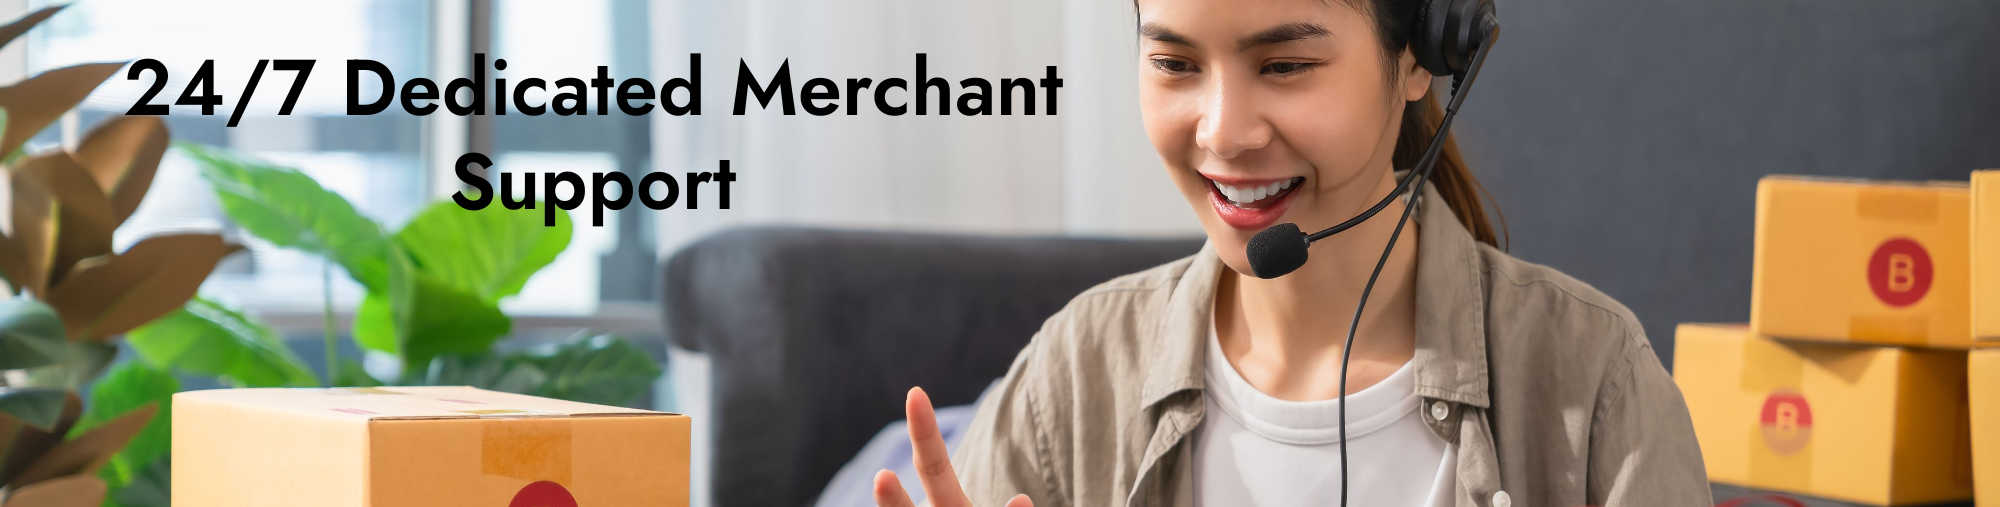 image of leaders merchant services